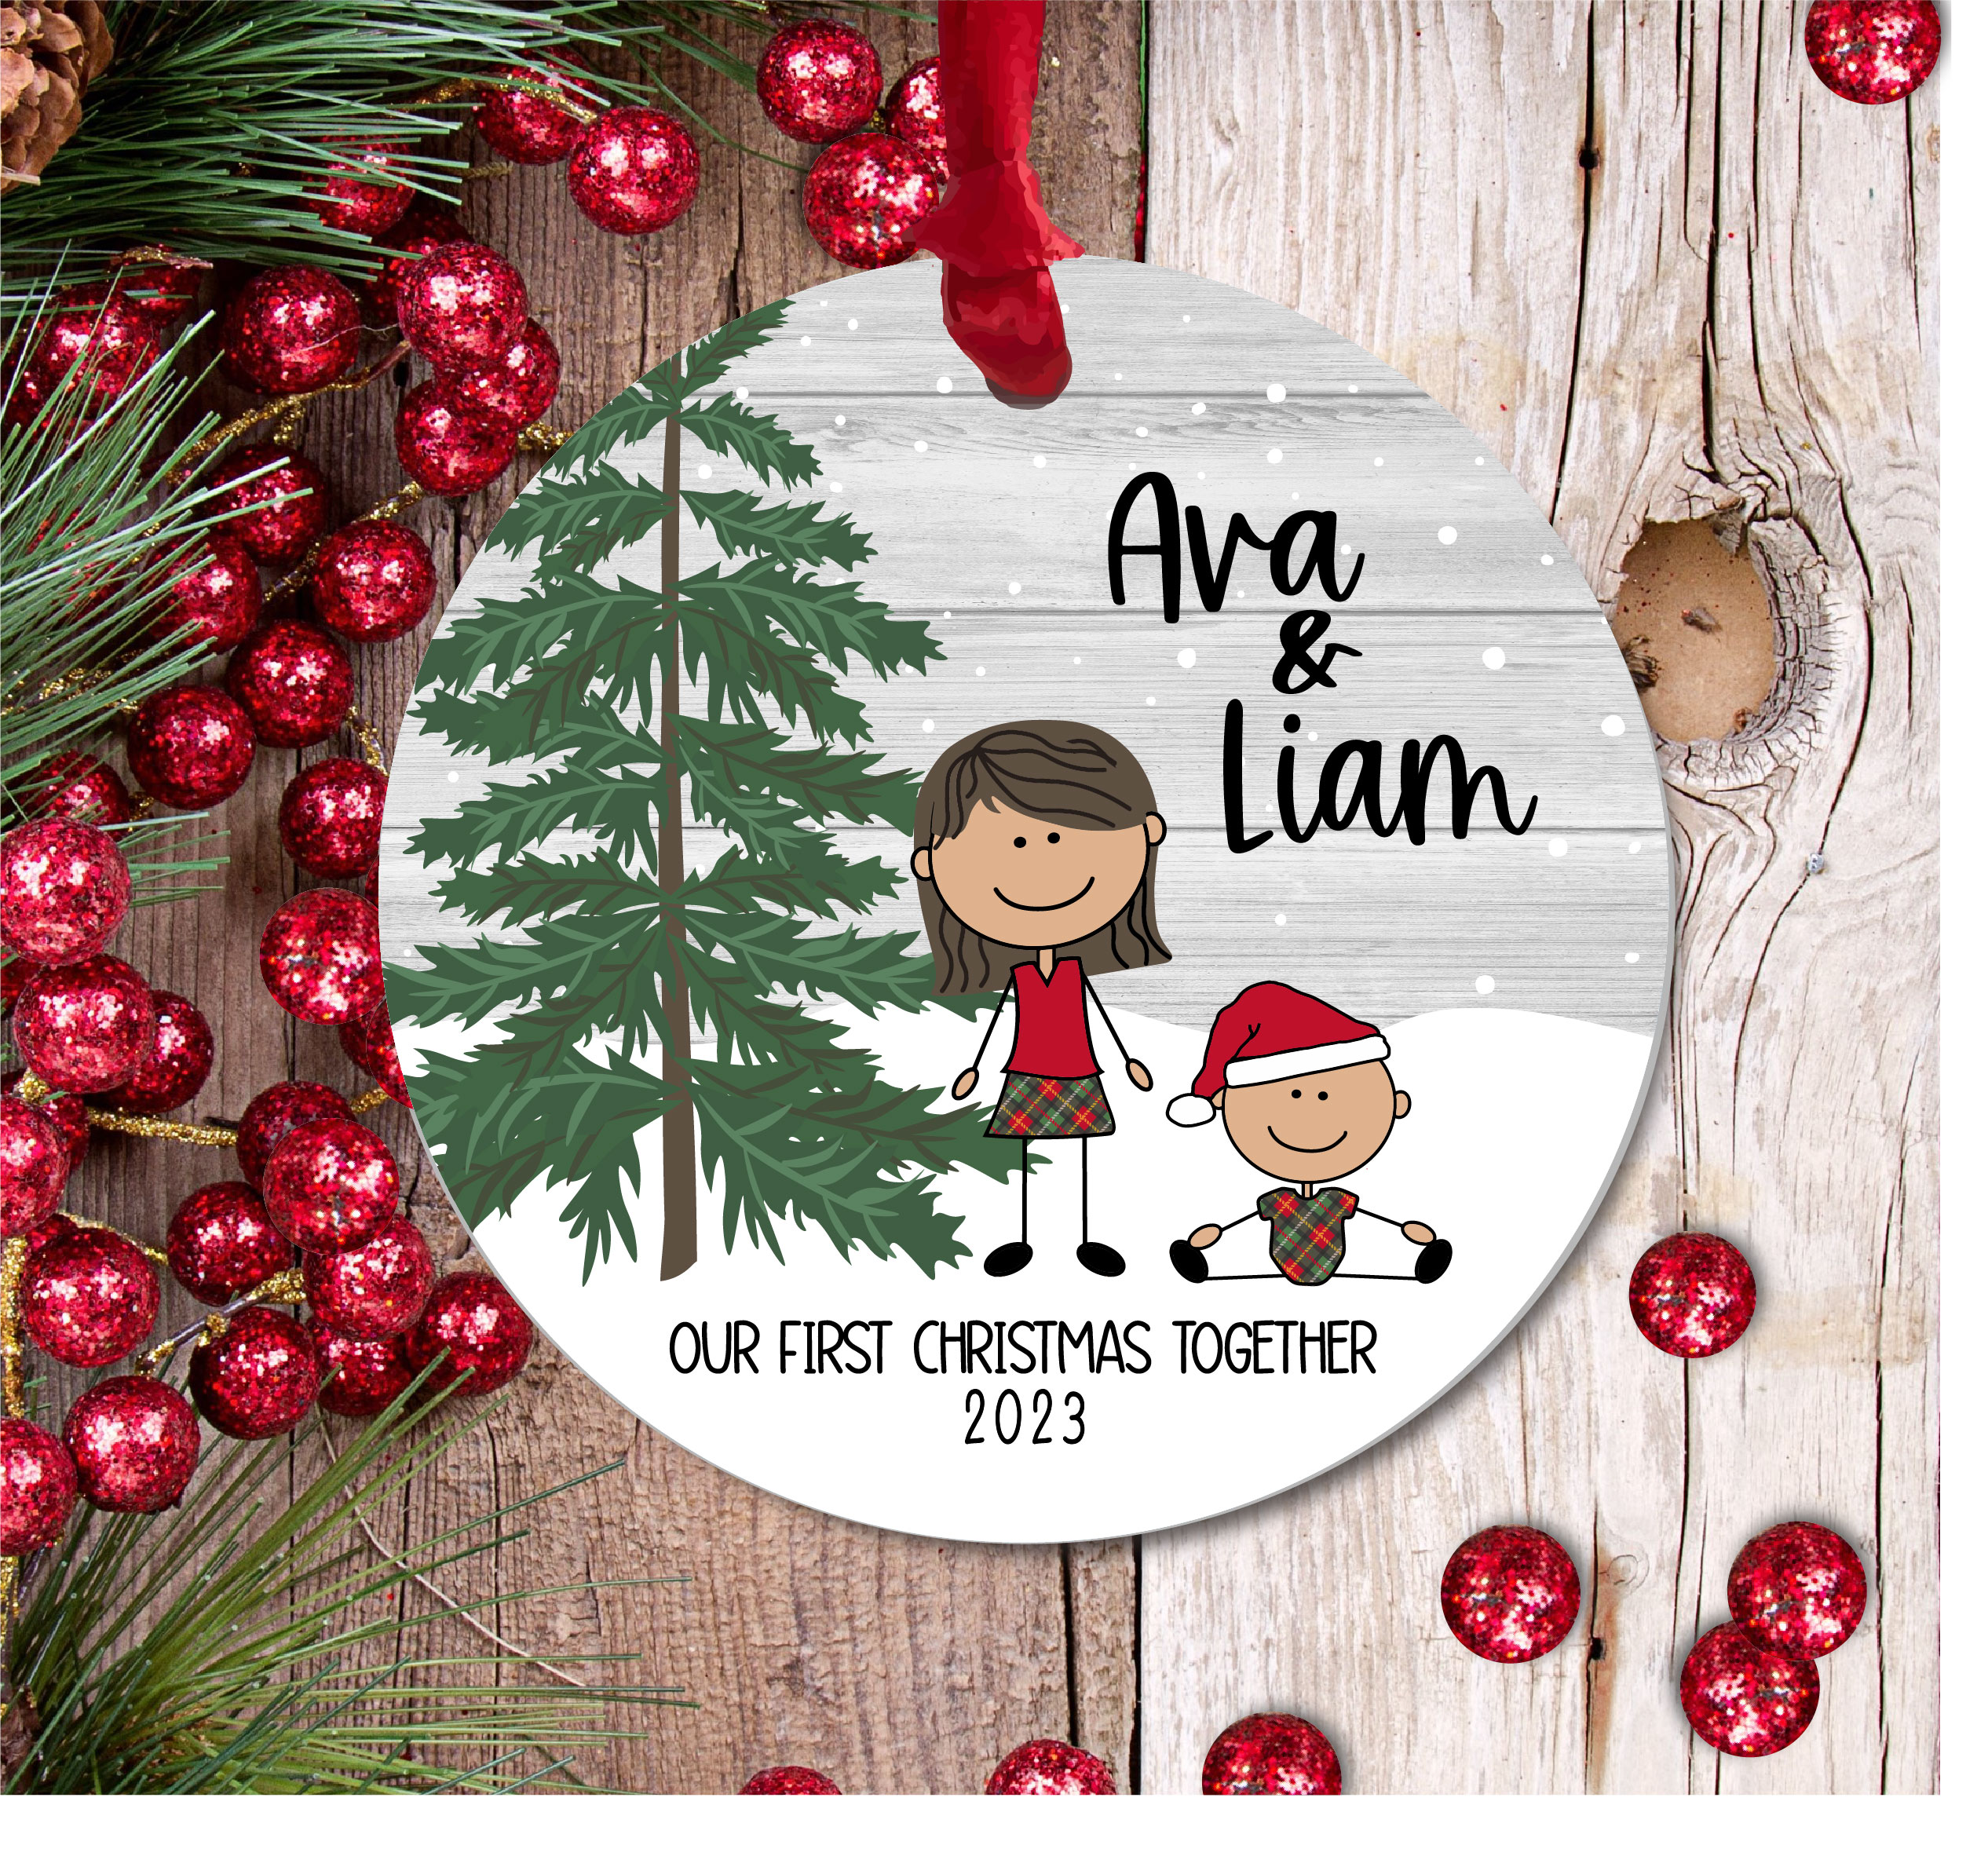 Our First Christmas Together Christmas Plaid Siblings Brother and Sister Christmas Ornament Medium Skin